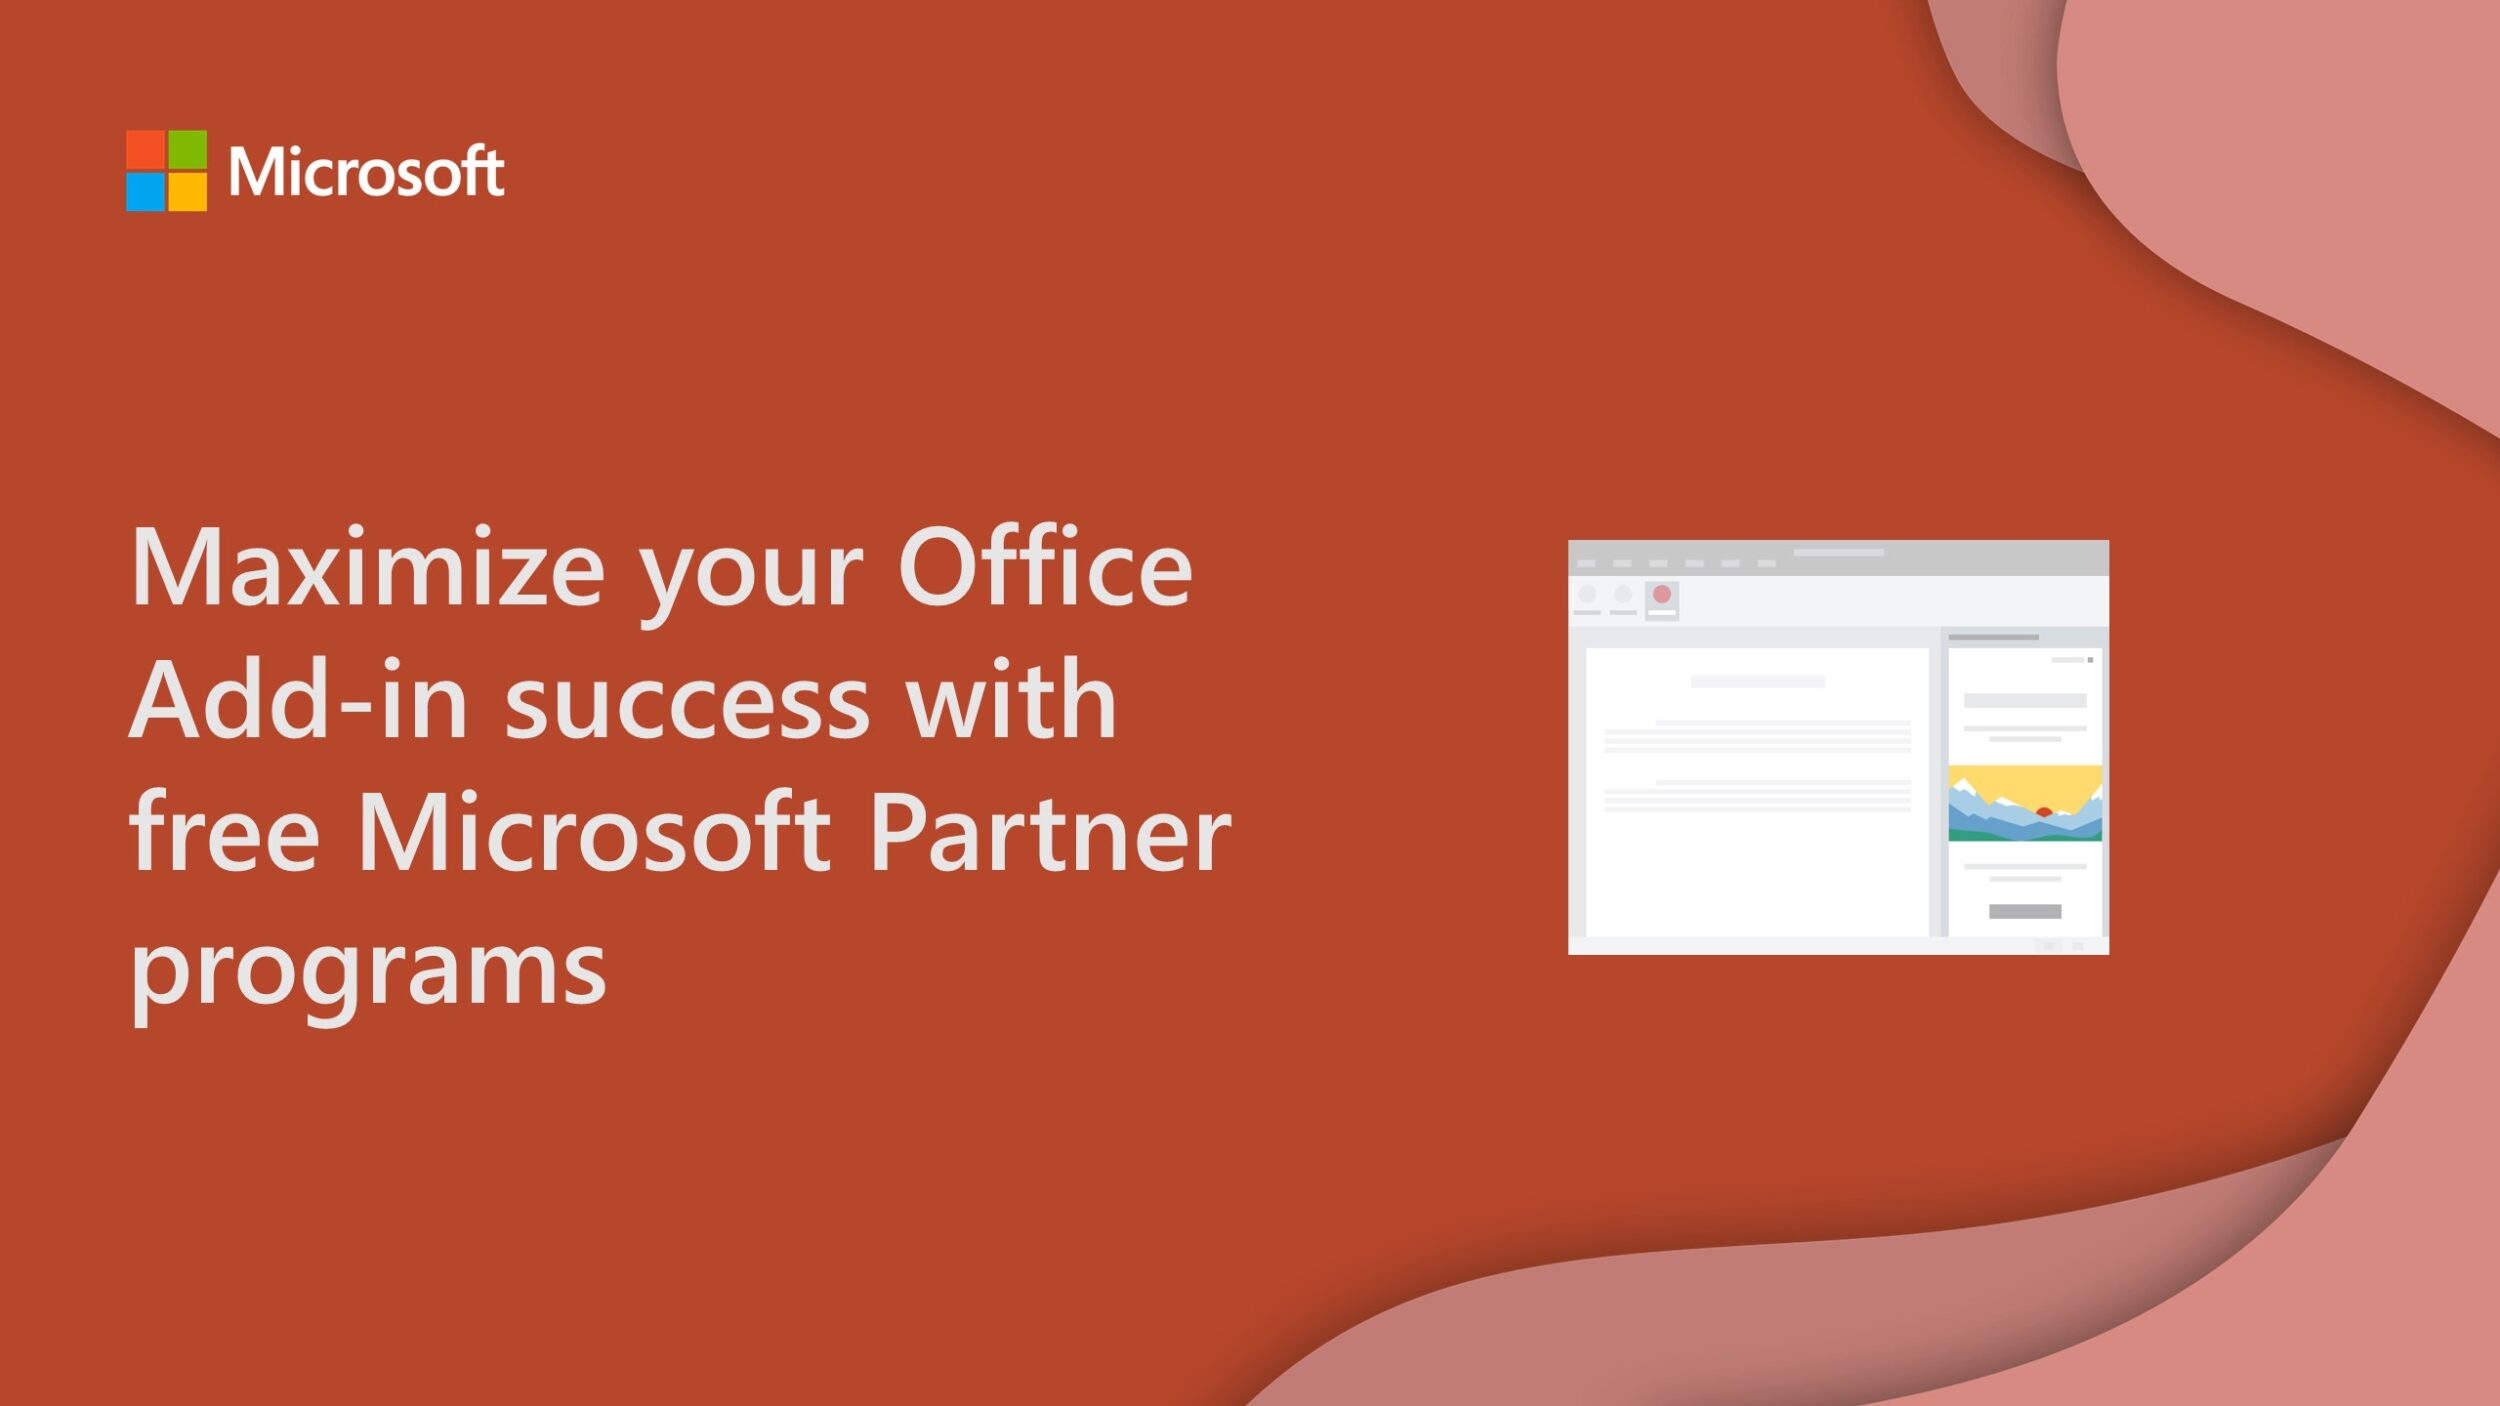 Maximize your Office Add-in success with free Microsoft Partner programs